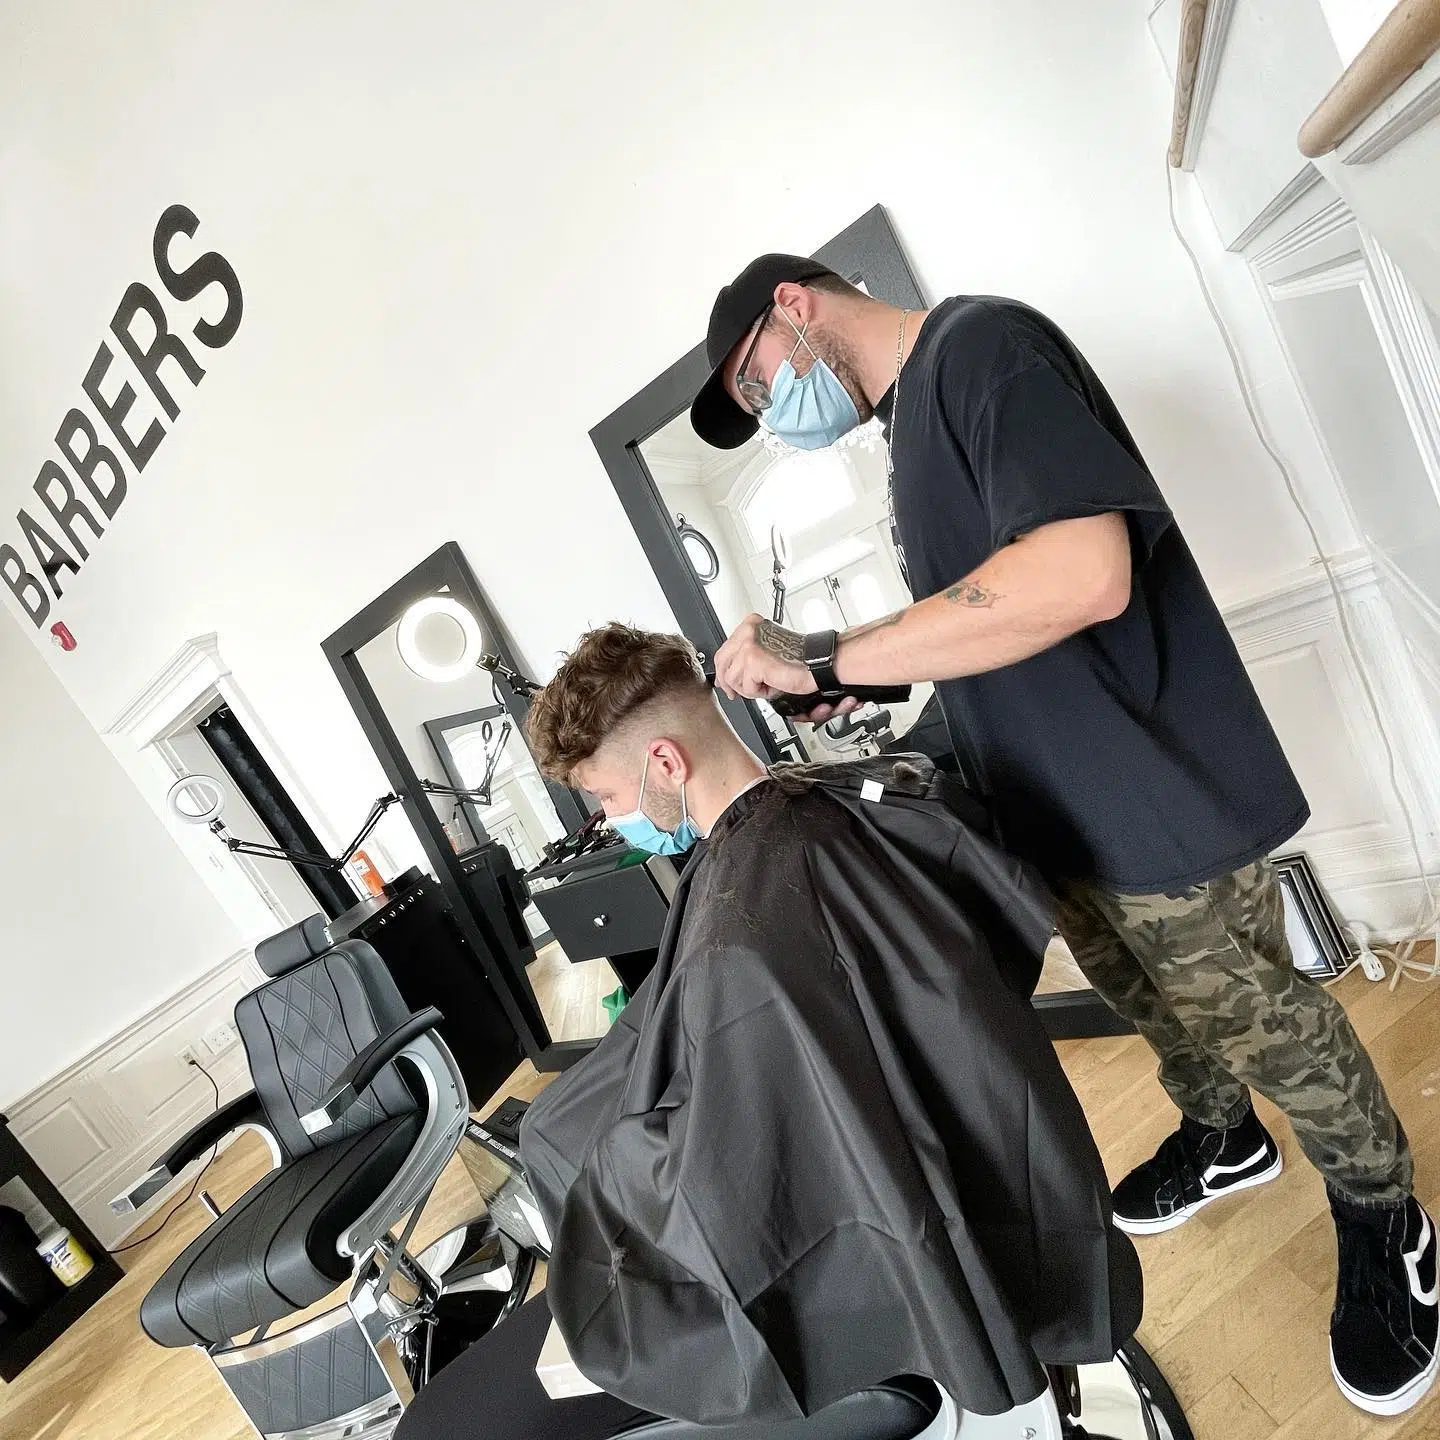 New Barbershop Opens At One Princess Street